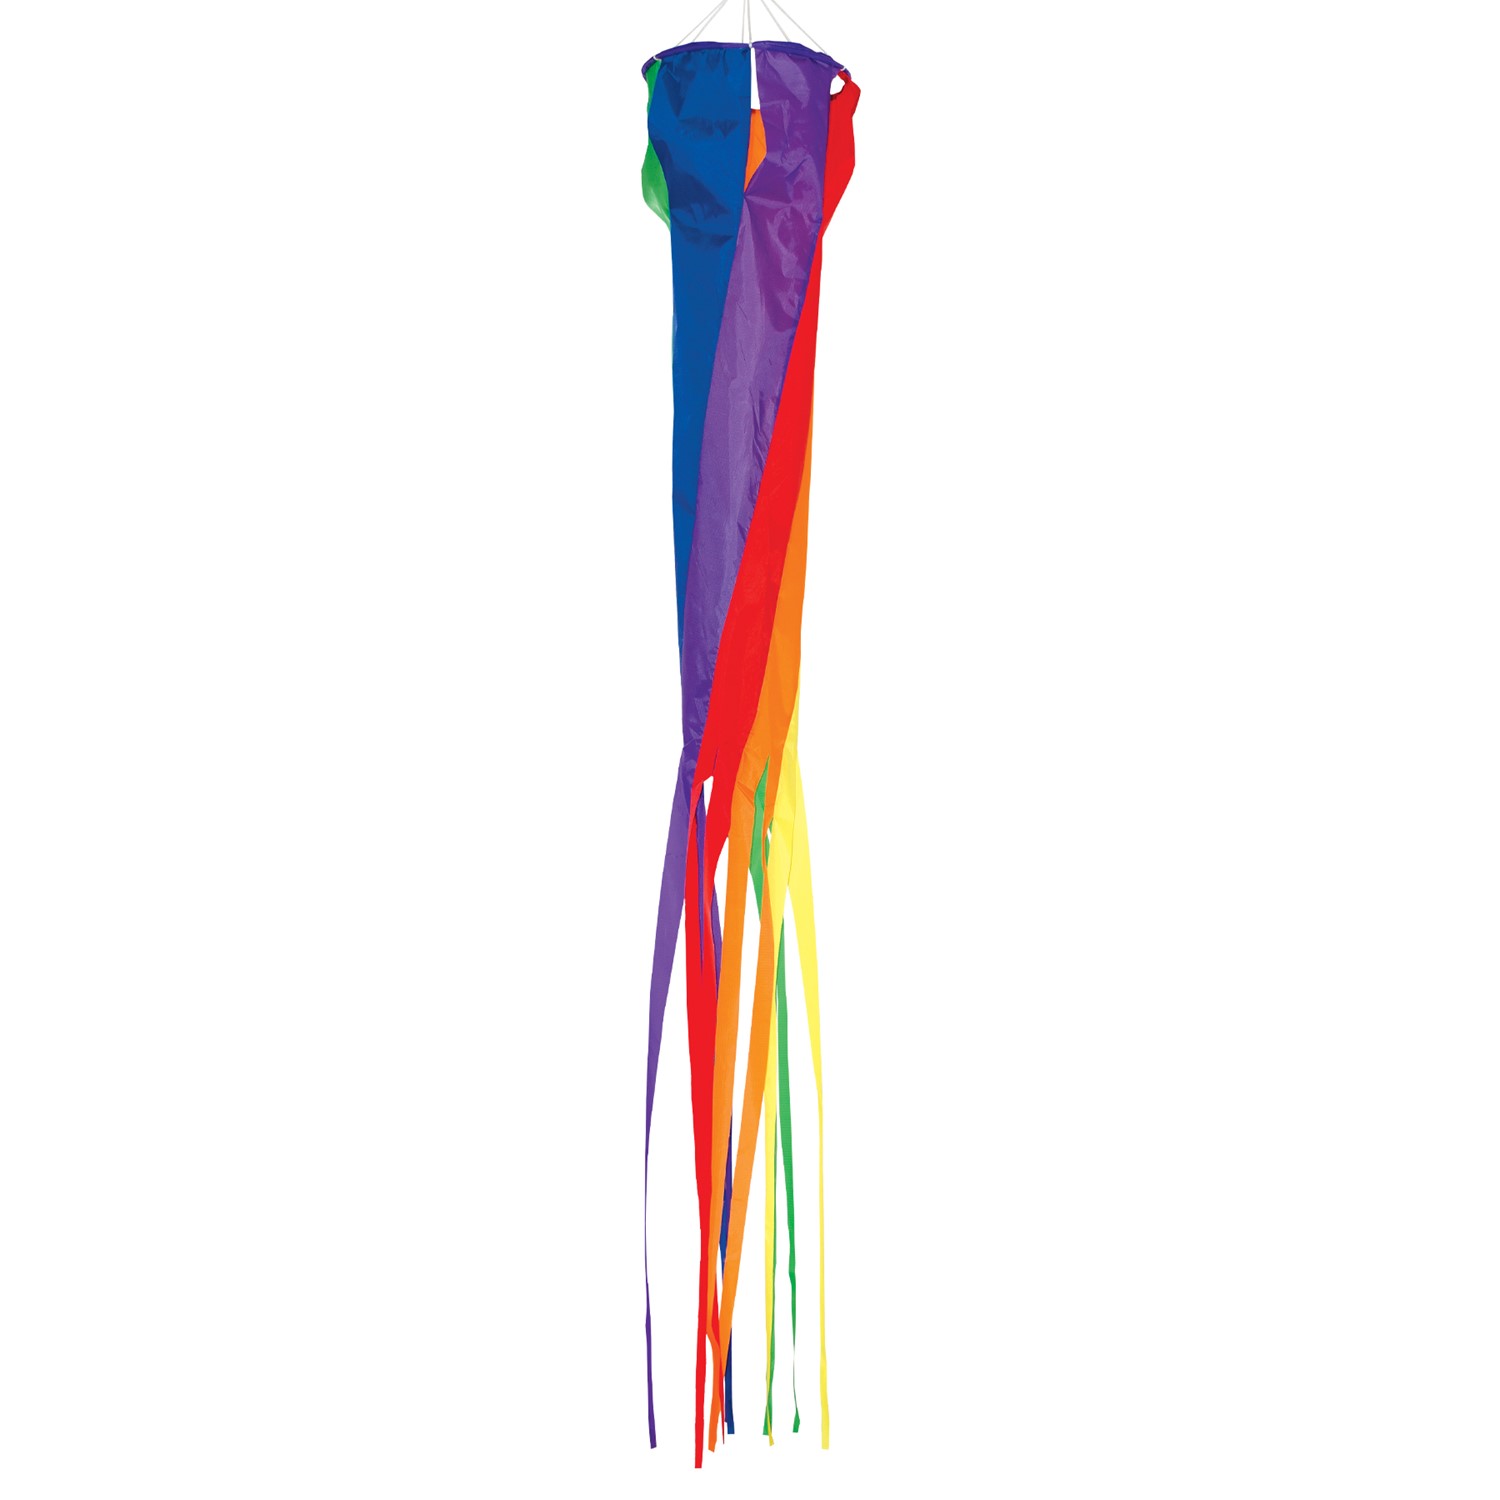 In the Breeze 96" Rainbow Spinsock 4223